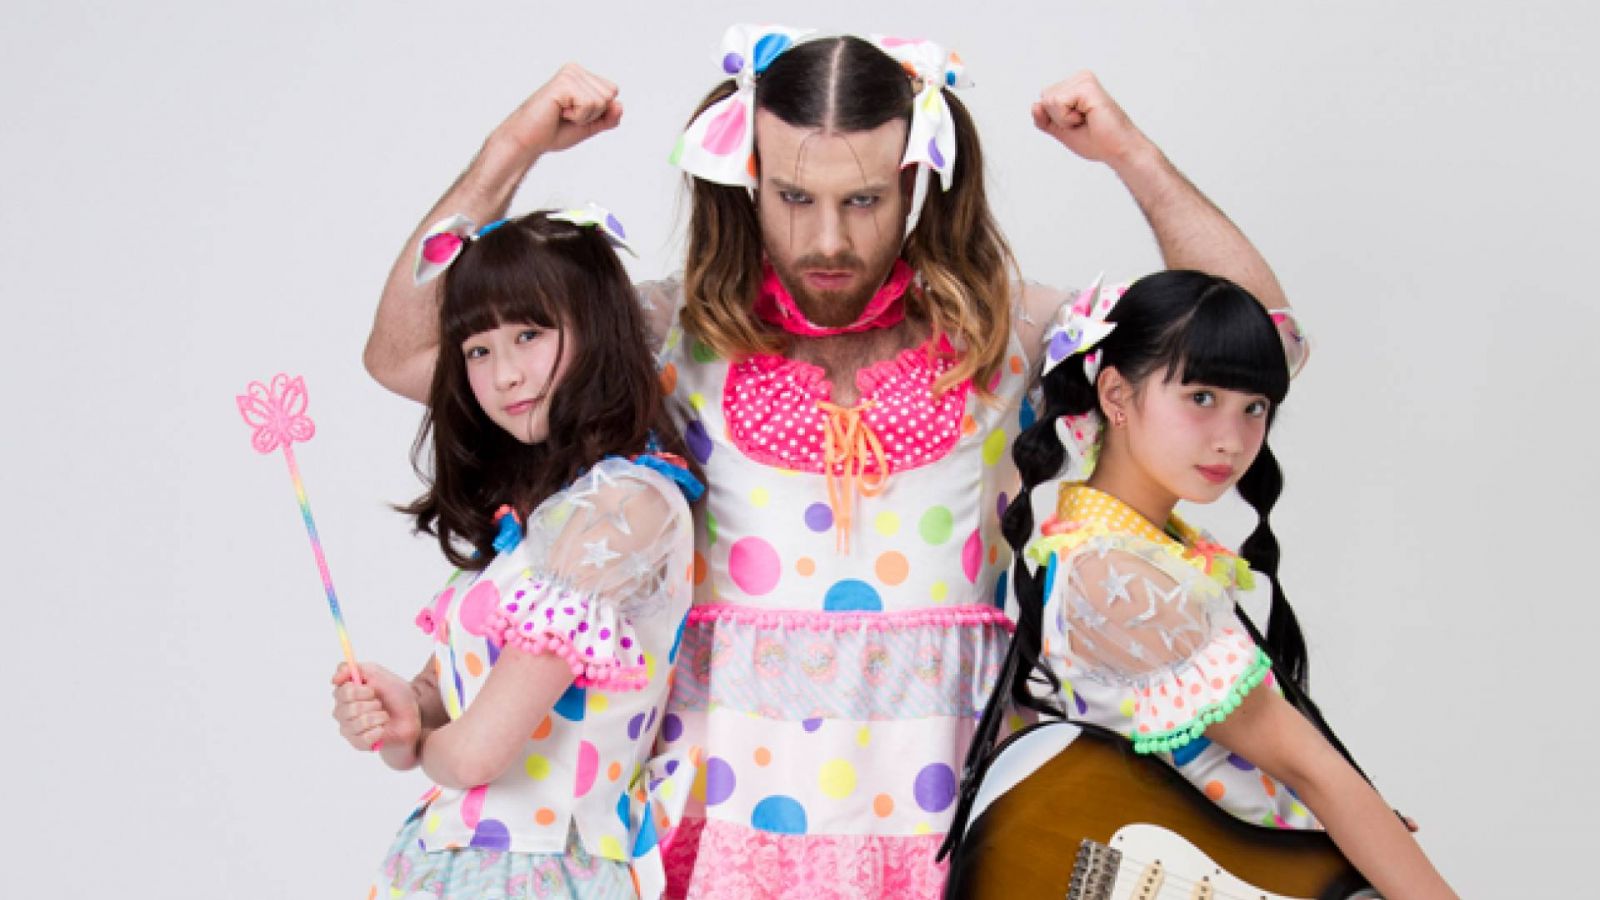 Entrevista com LADYBABY © 2015 clearstone Co., Ltd. All rights reserved.